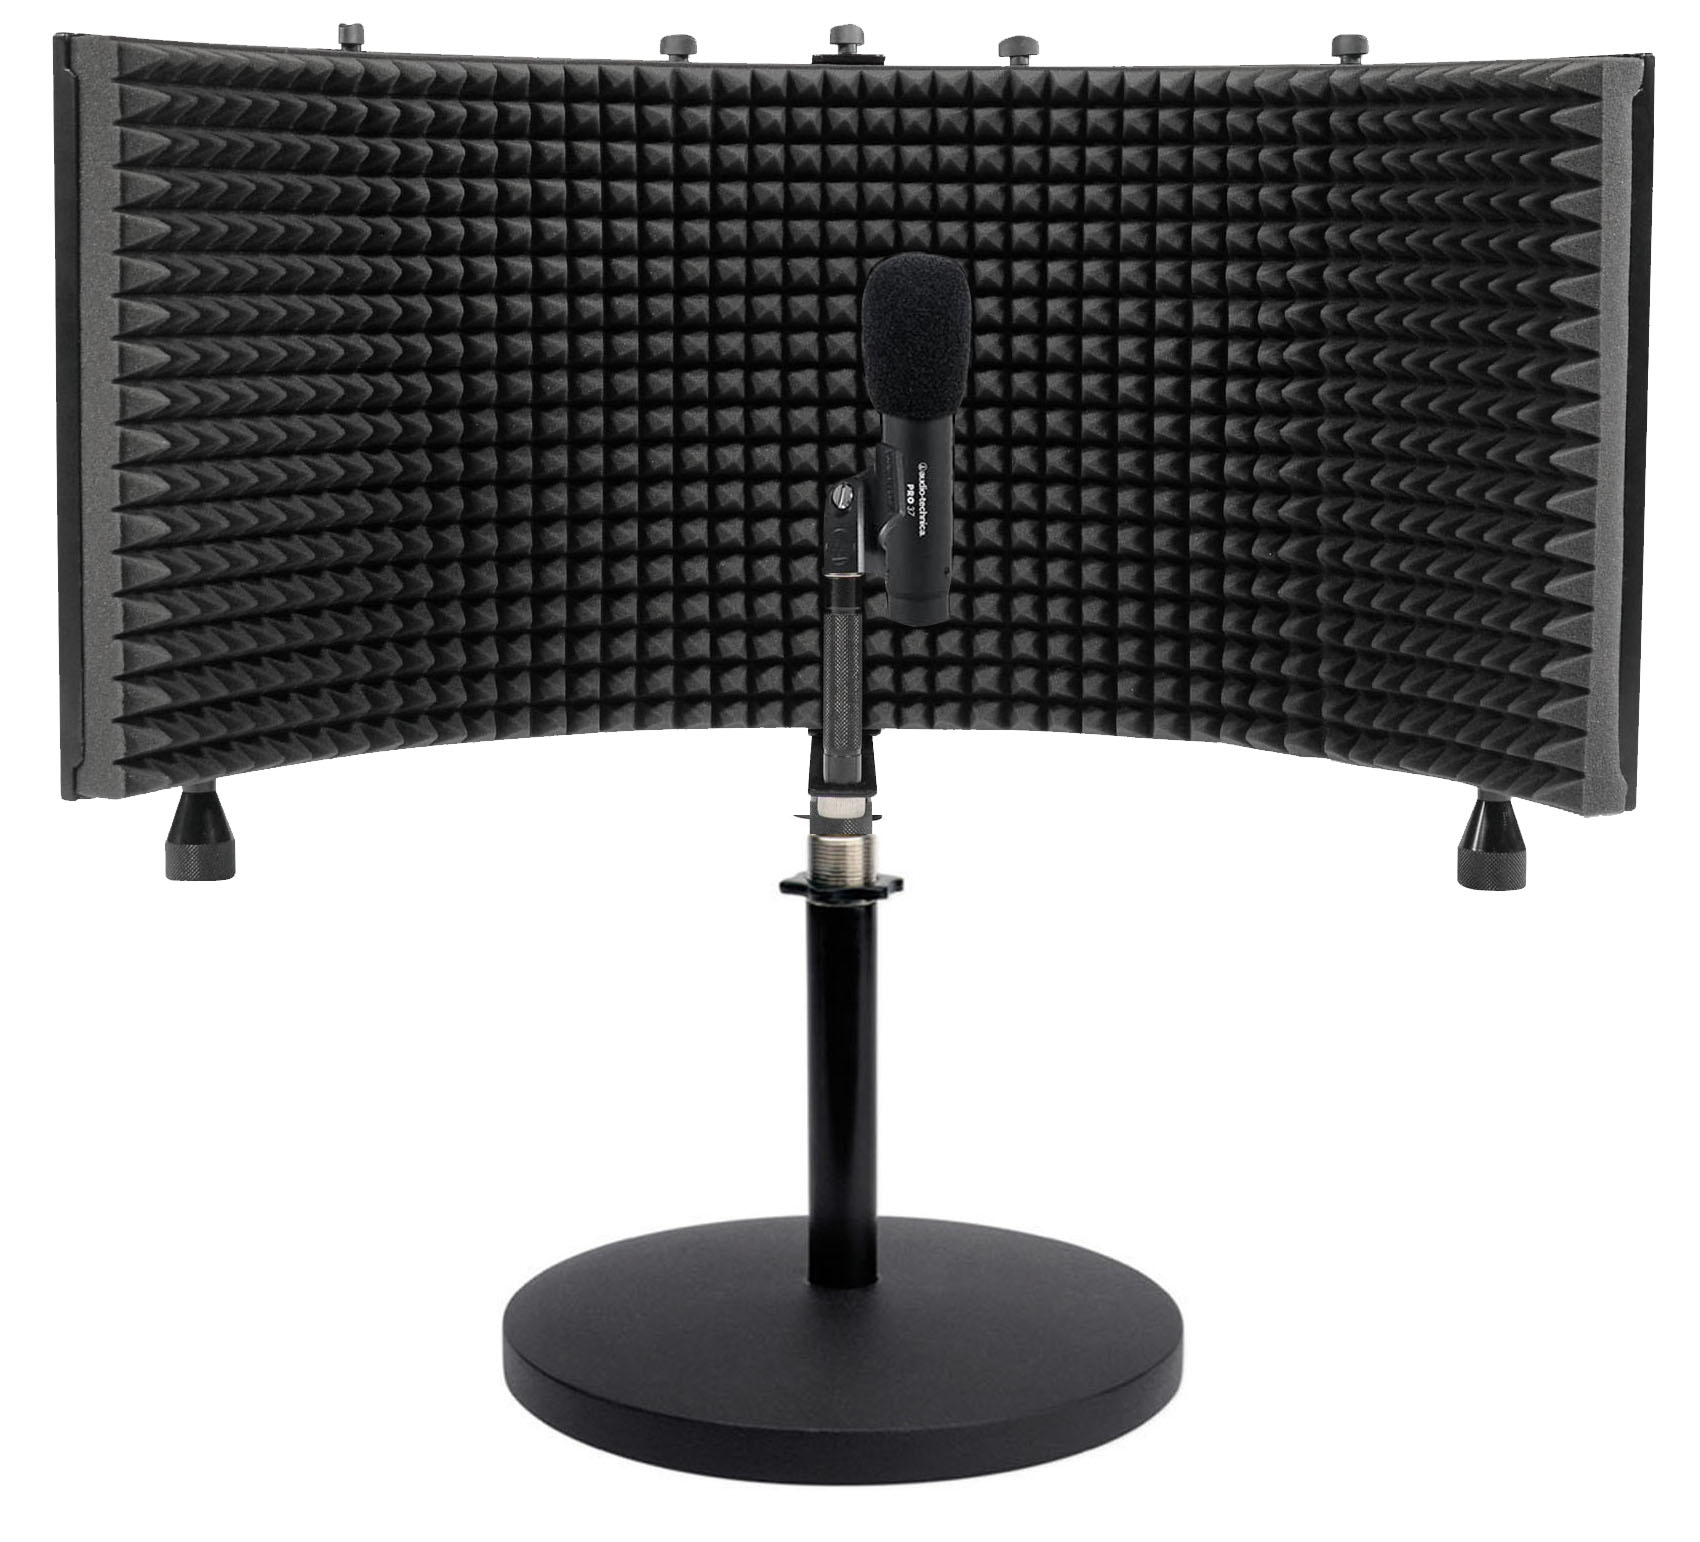 Audio Technica PRO37 Diaphragm Condenser Microphone PRO 37+Mic Stand+Iso Shield - image 1 of 6